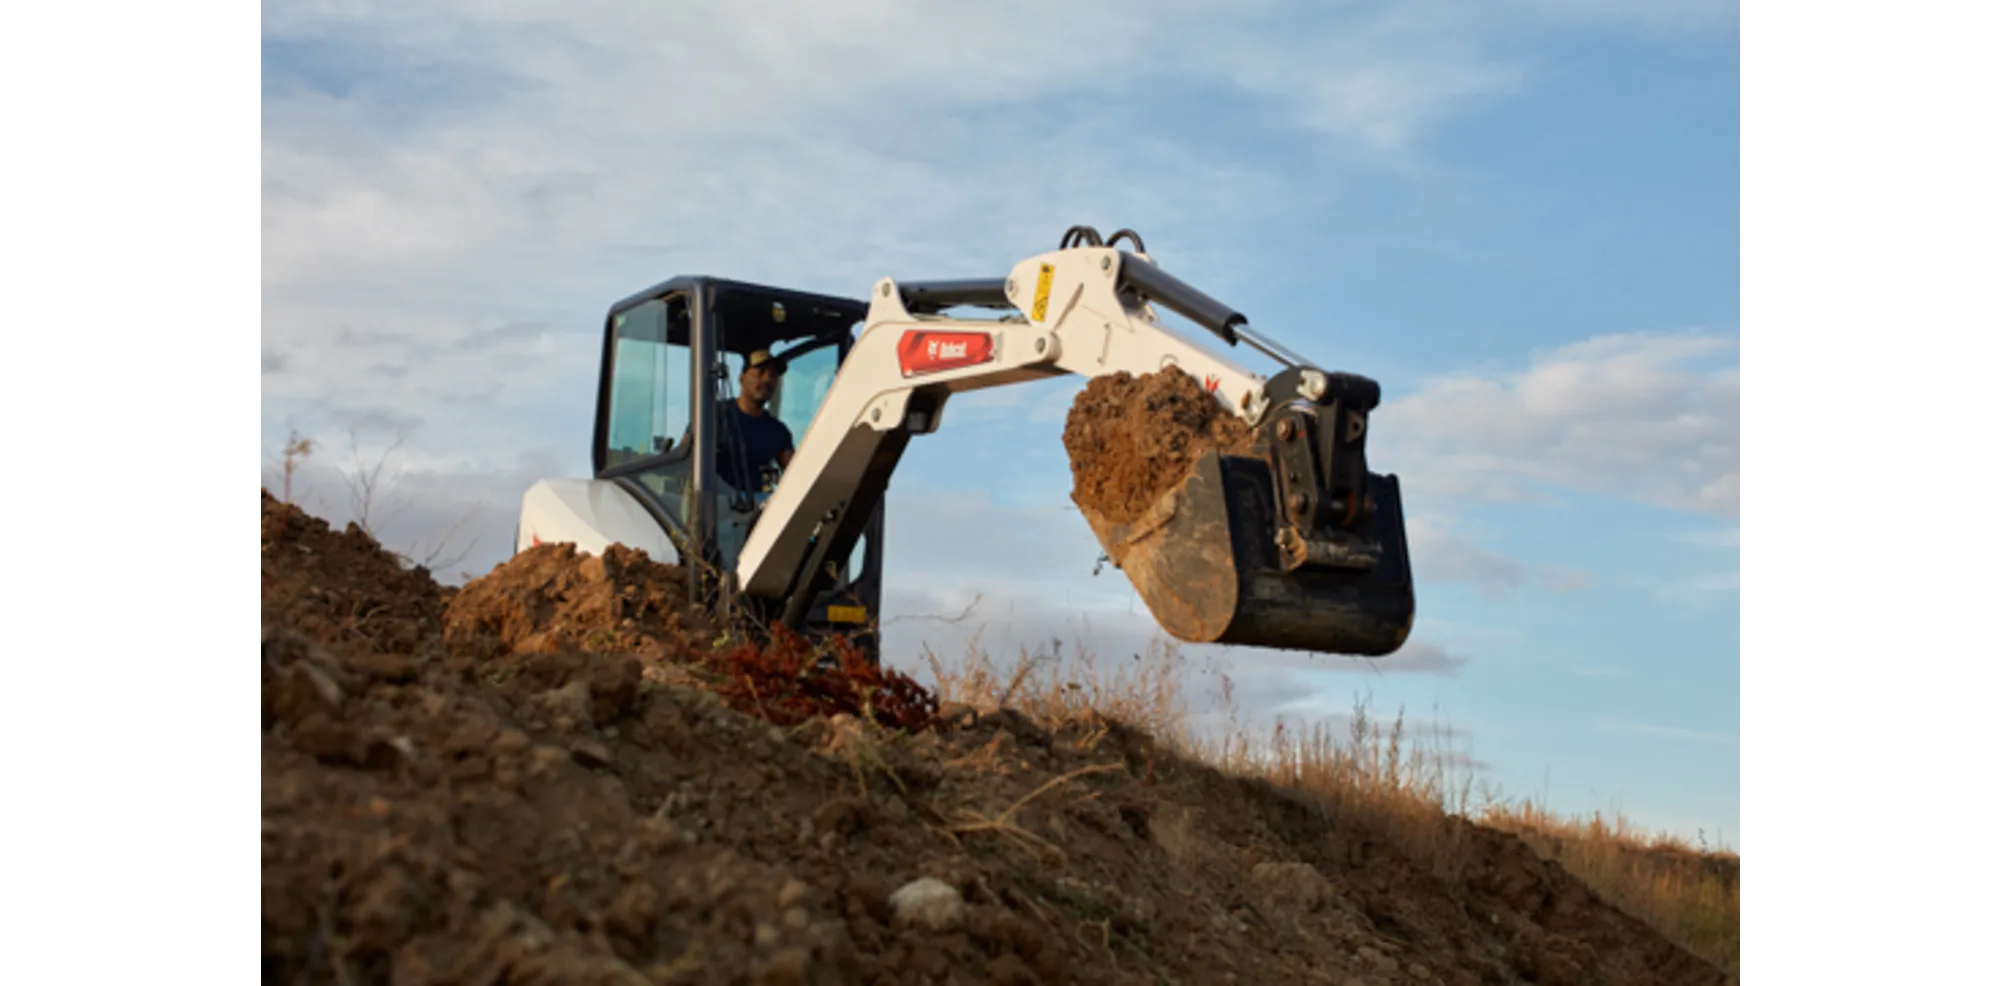 Browse Specs and more for the Bobcat E32 Compact Excavator - KC Bobcat